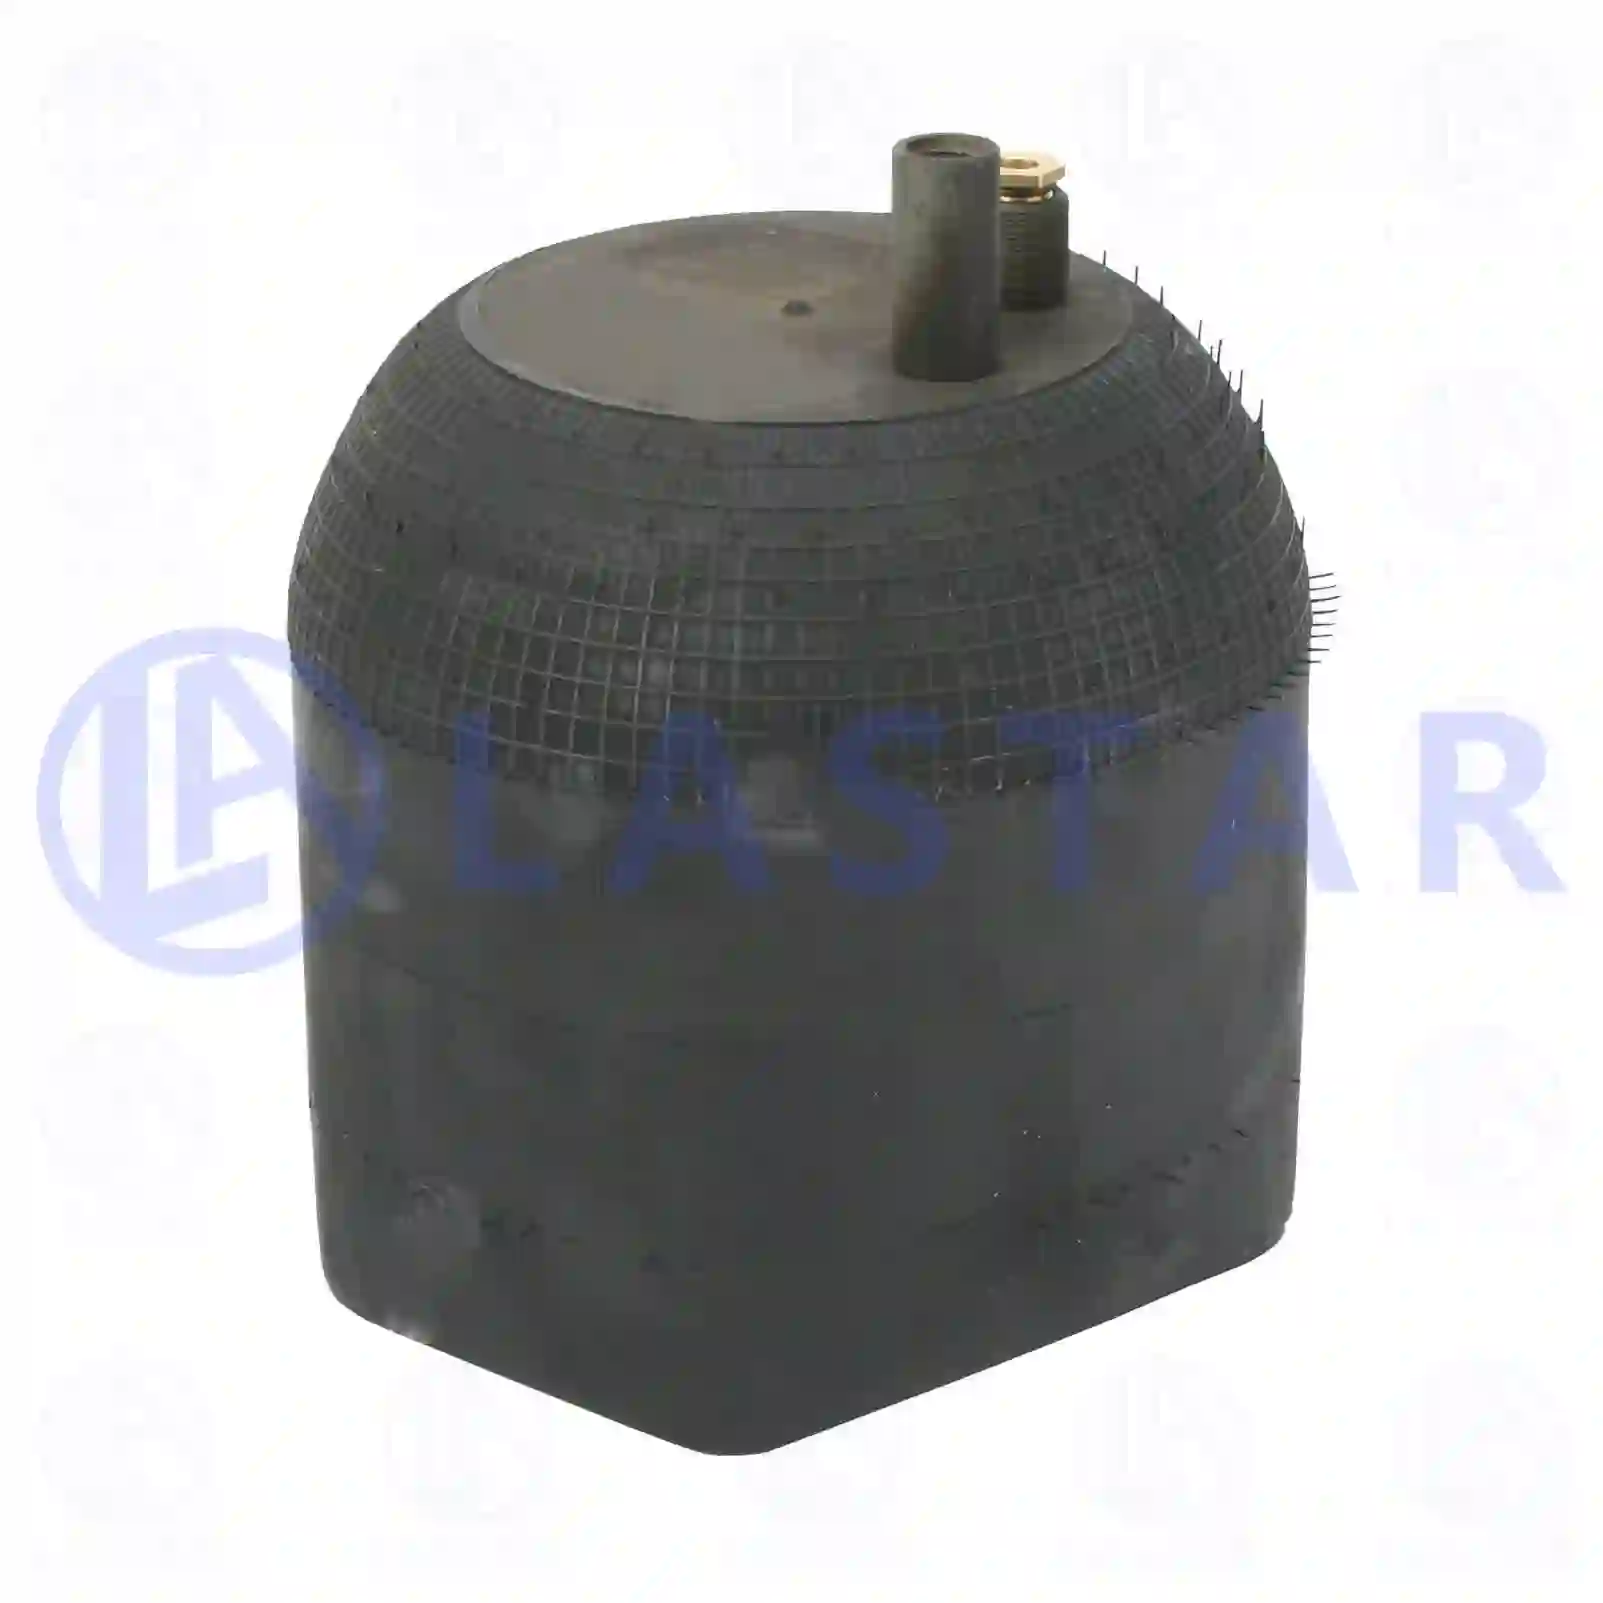 Air spring, without piston, 77728159, 1527109, 9423280101, 9423280501, , , ||  77728159 Lastar Spare Part | Truck Spare Parts, Auotomotive Spare Parts Air spring, without piston, 77728159, 1527109, 9423280101, 9423280501, , , ||  77728159 Lastar Spare Part | Truck Spare Parts, Auotomotive Spare Parts